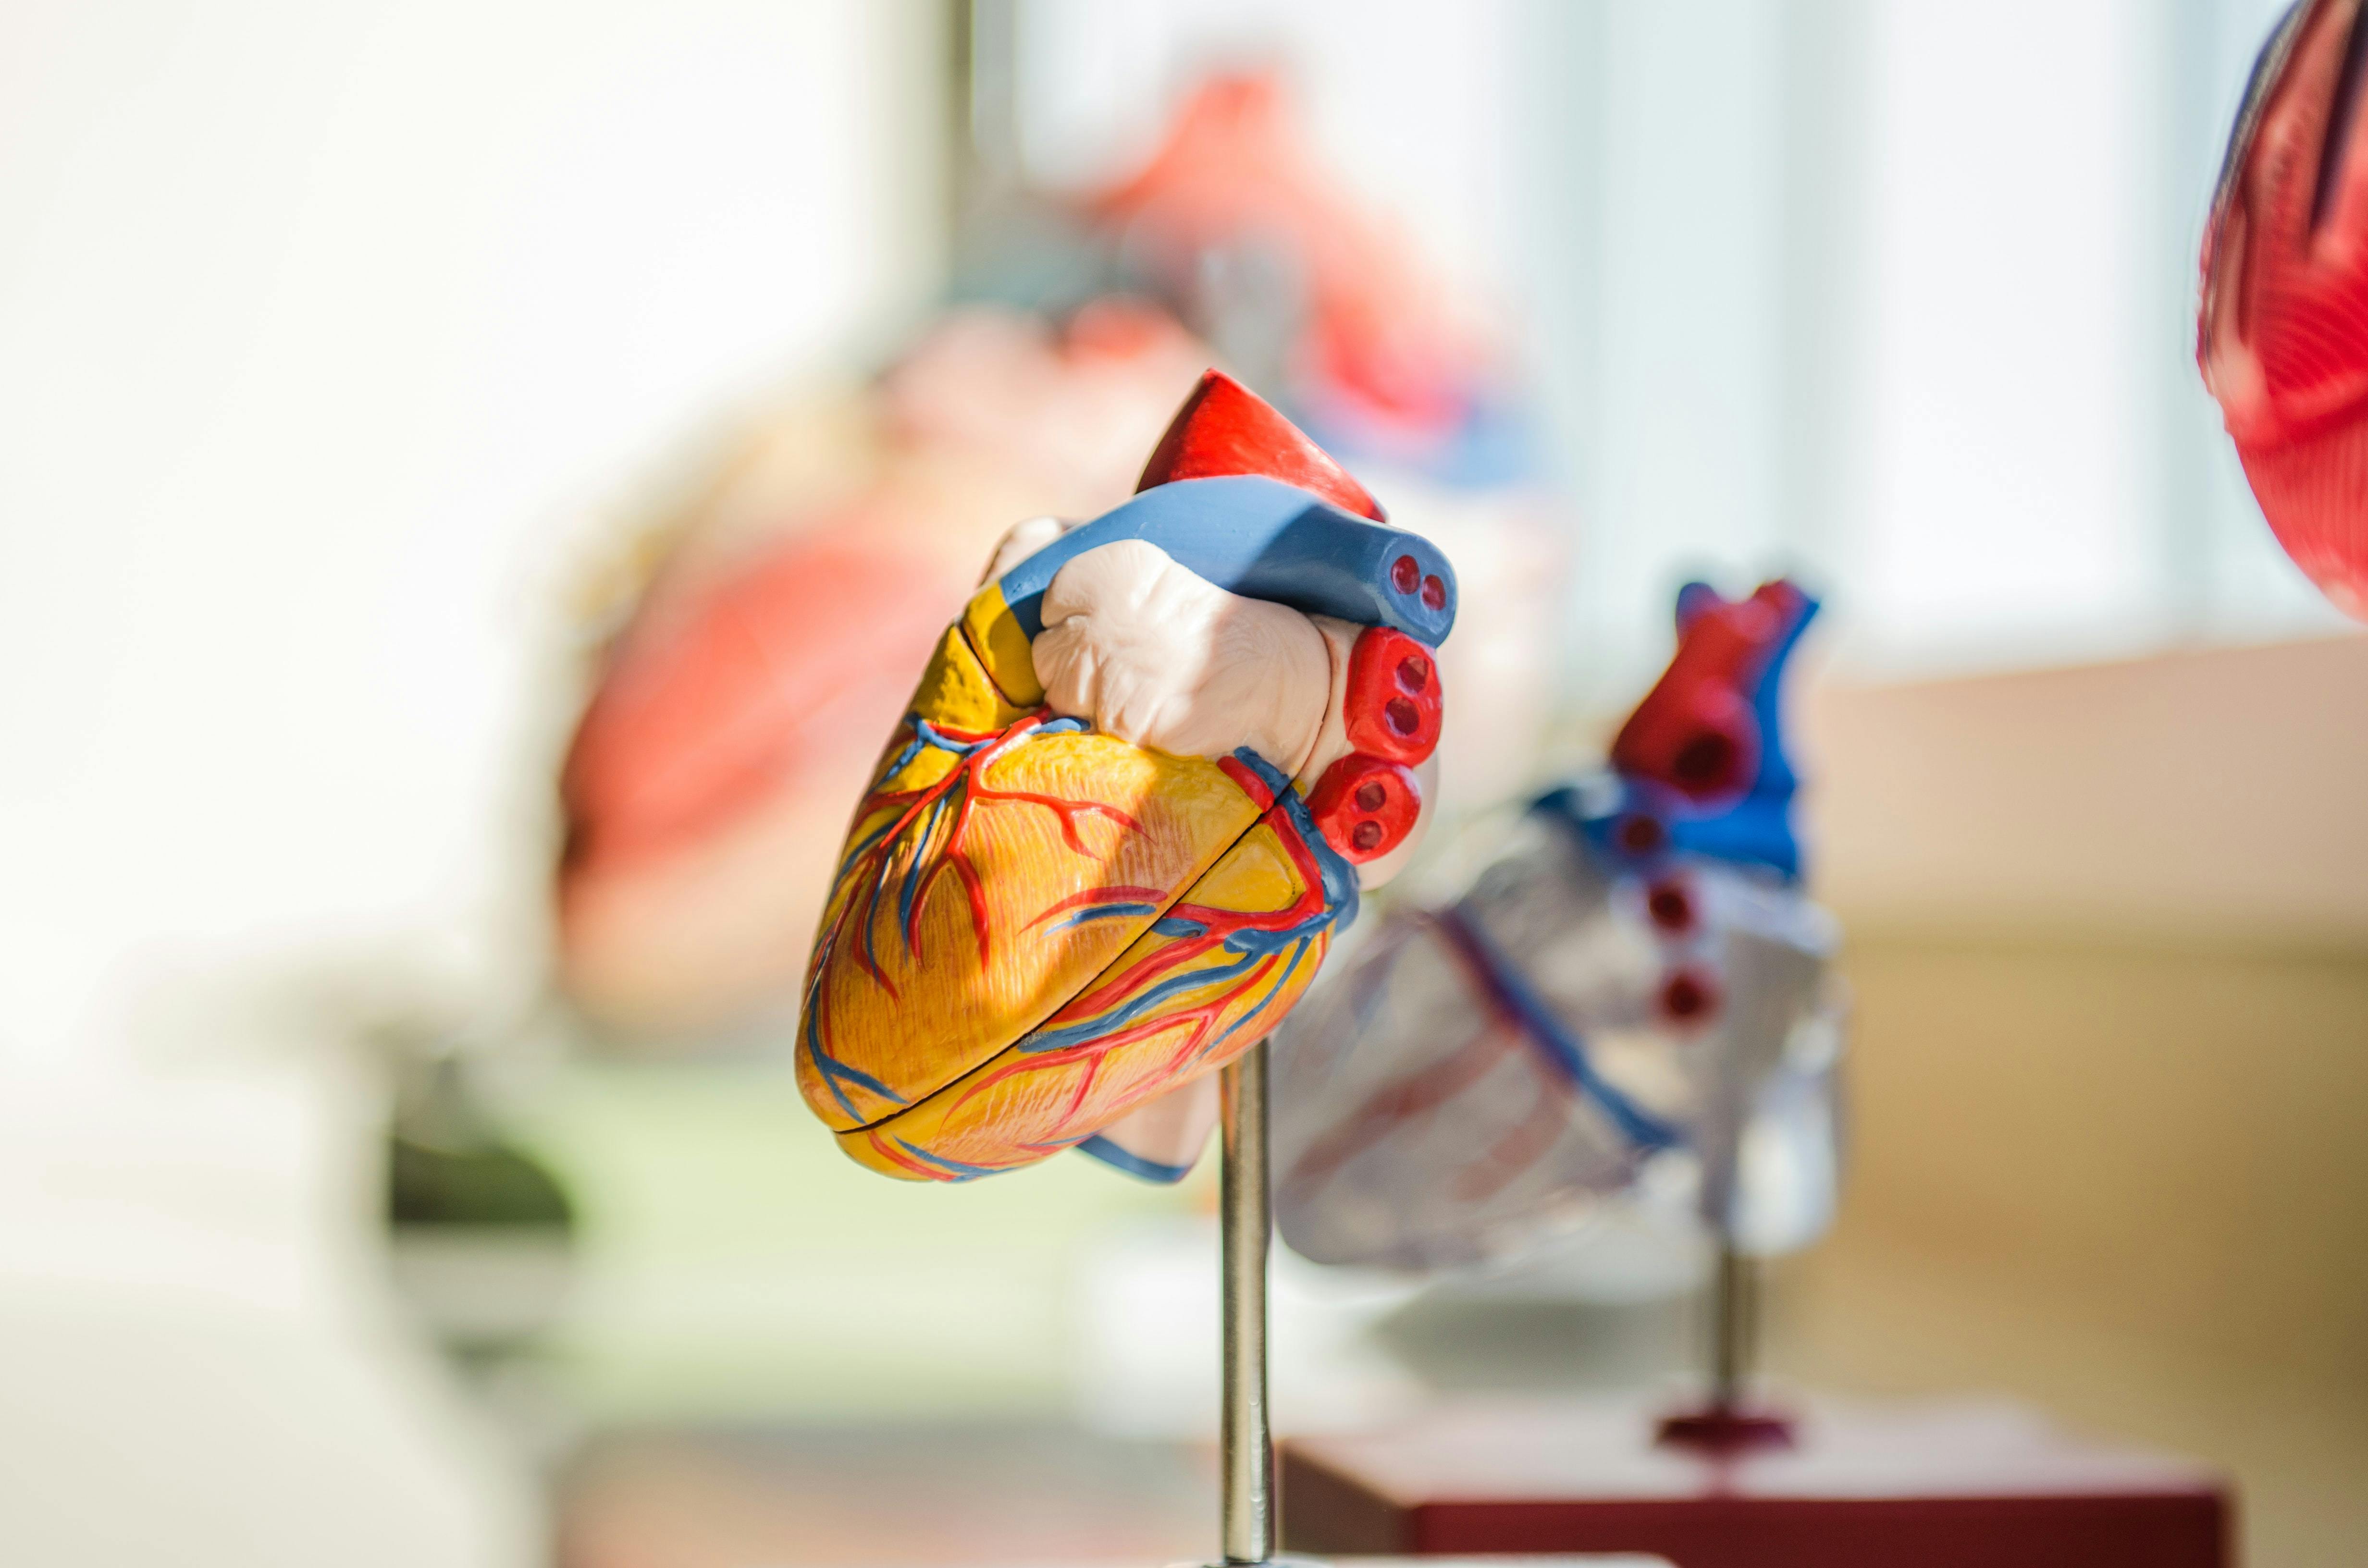 A colorful model of the human heart.